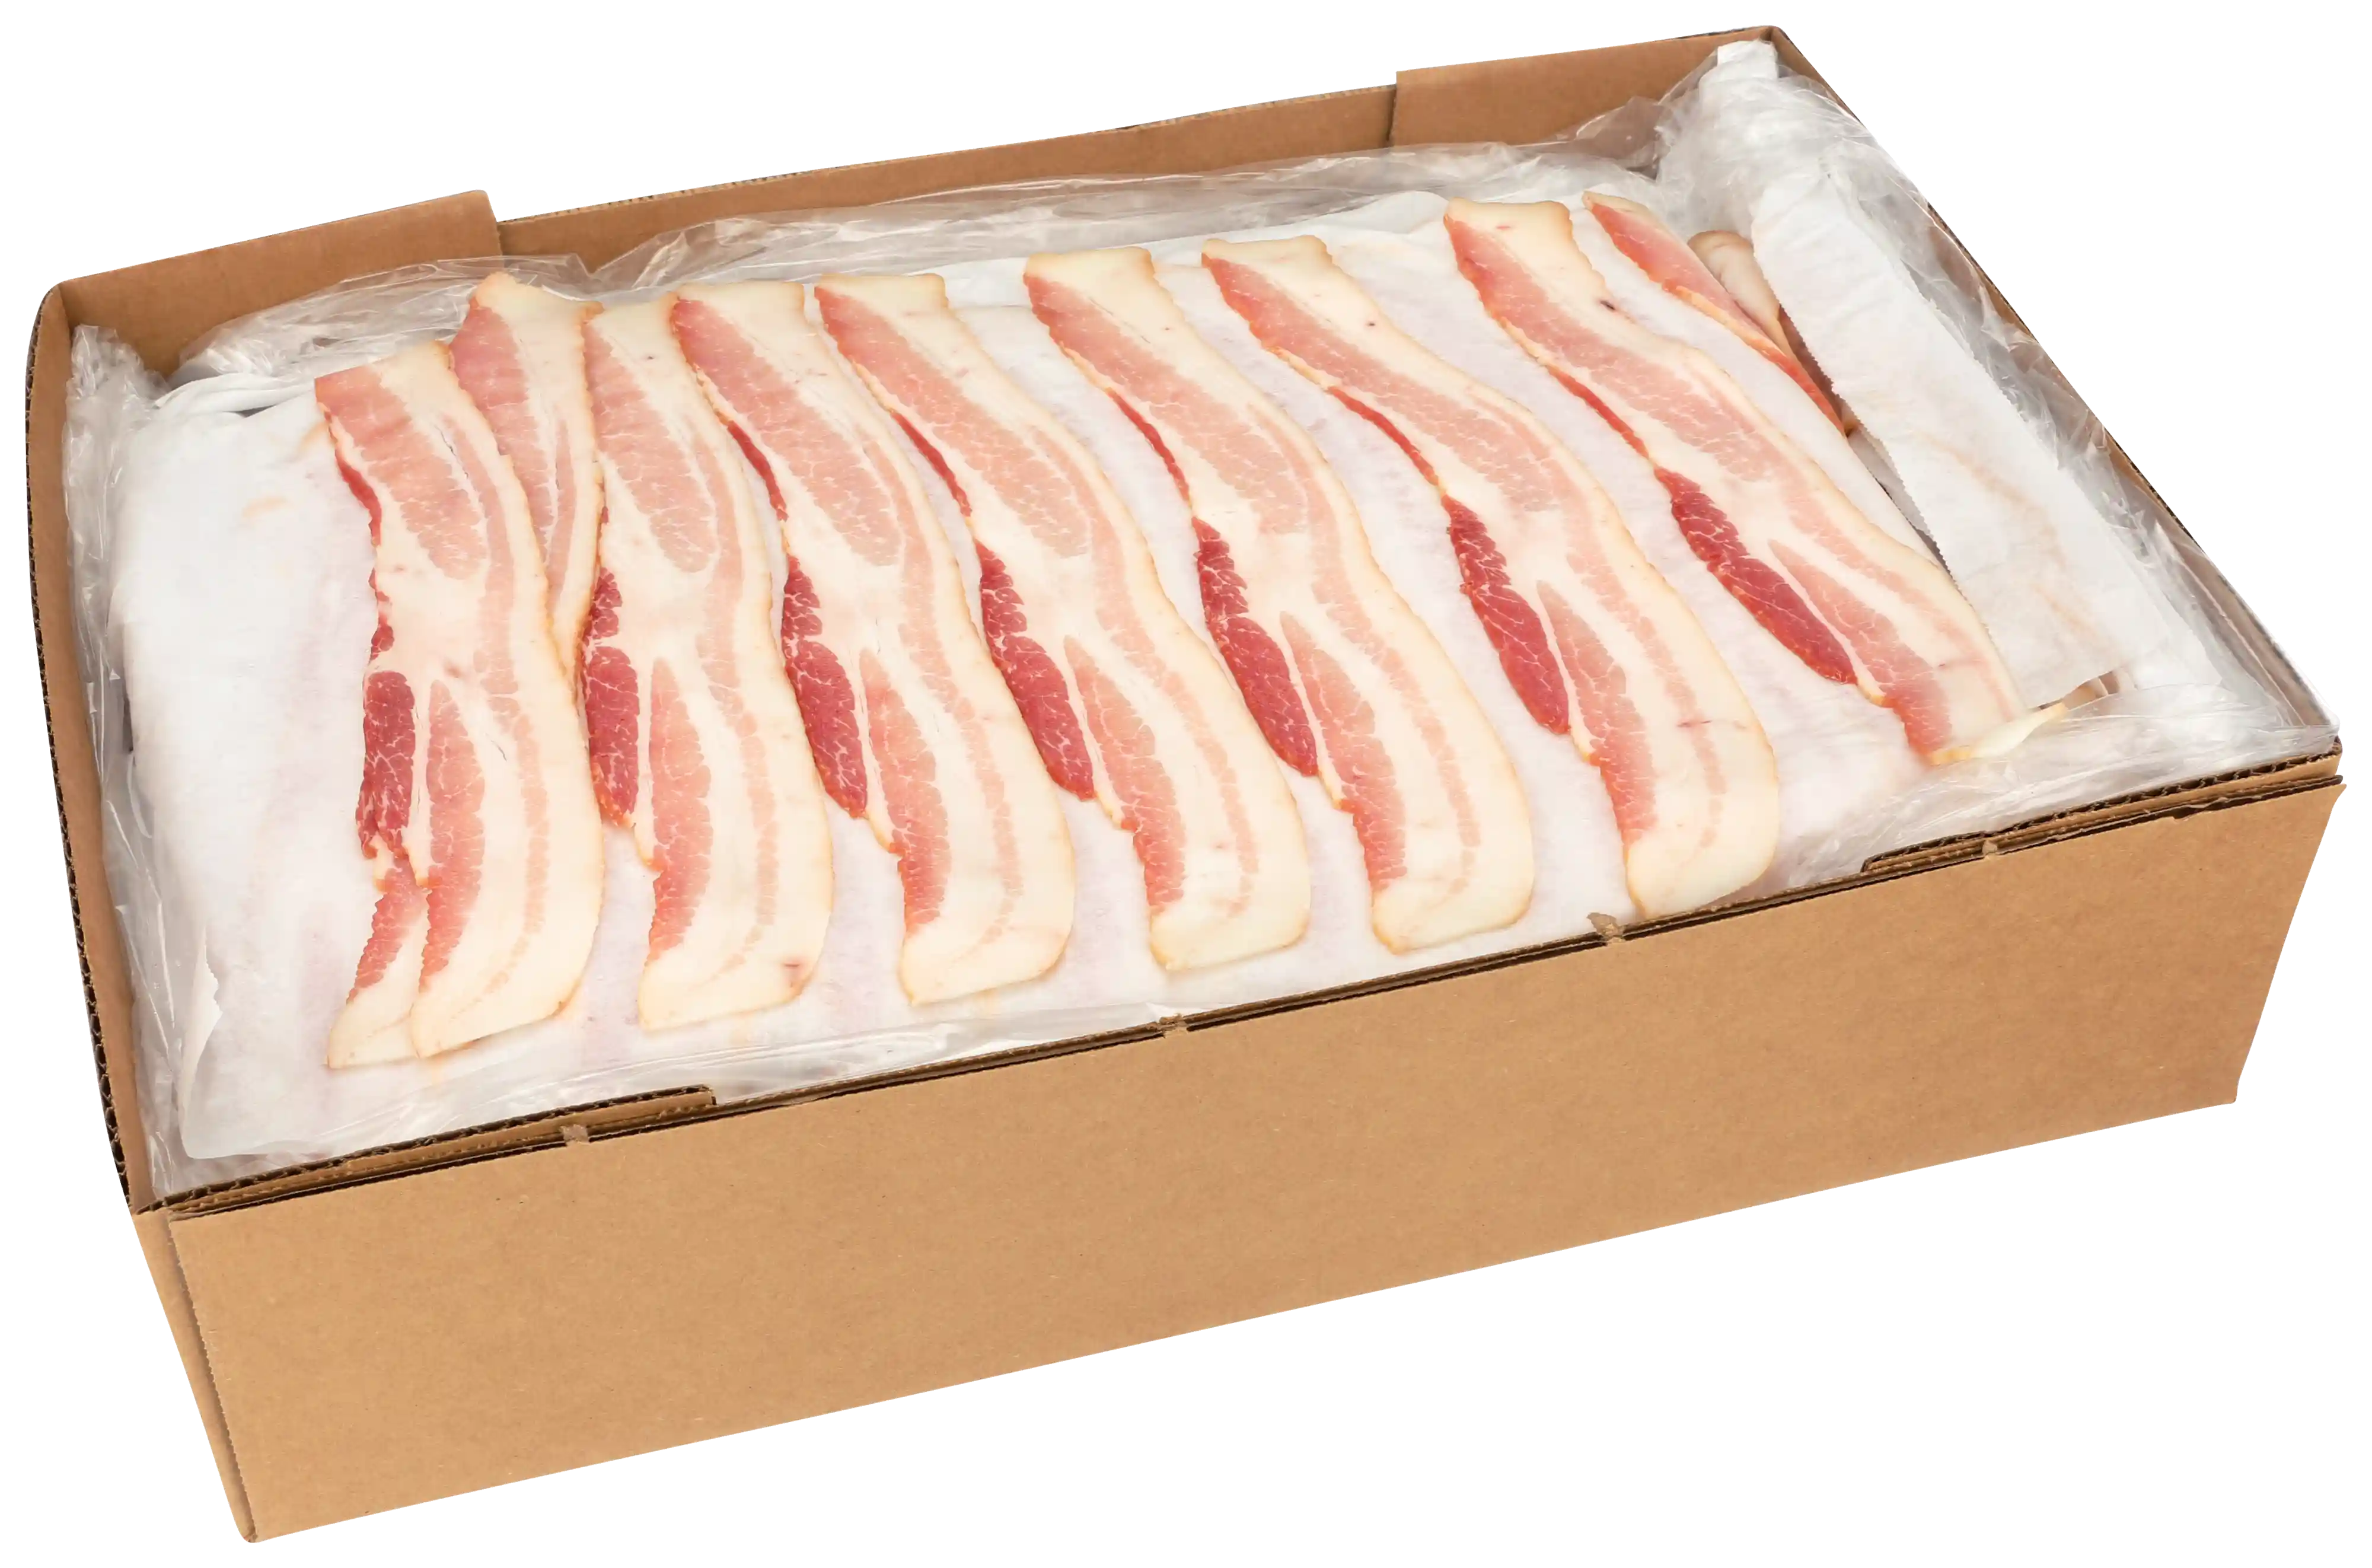 Wright® Brand Naturally Hickory Smoked Extra Thin Sliced Bacon, Flat-Pack®, 15 Lbs, 22-26 Slices per Pound, Frozen_image_31